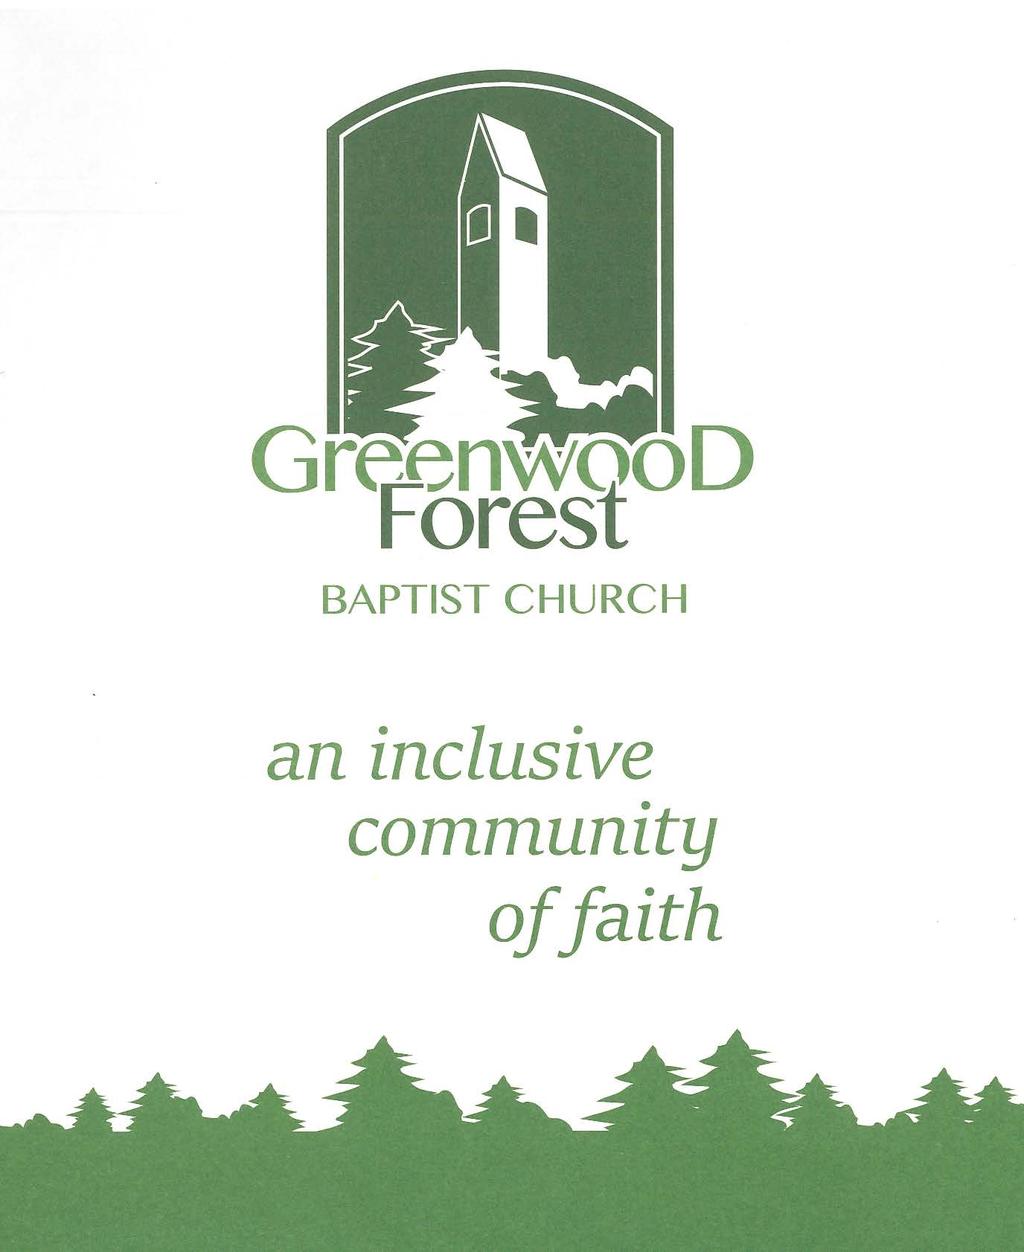 Chiming of the Hour GREENWOOD FOREST BAPTIST CHURCH The Worship of God The Third Sunday After Epiphany January 27, 2019 Gathering Hymn 272 (v.